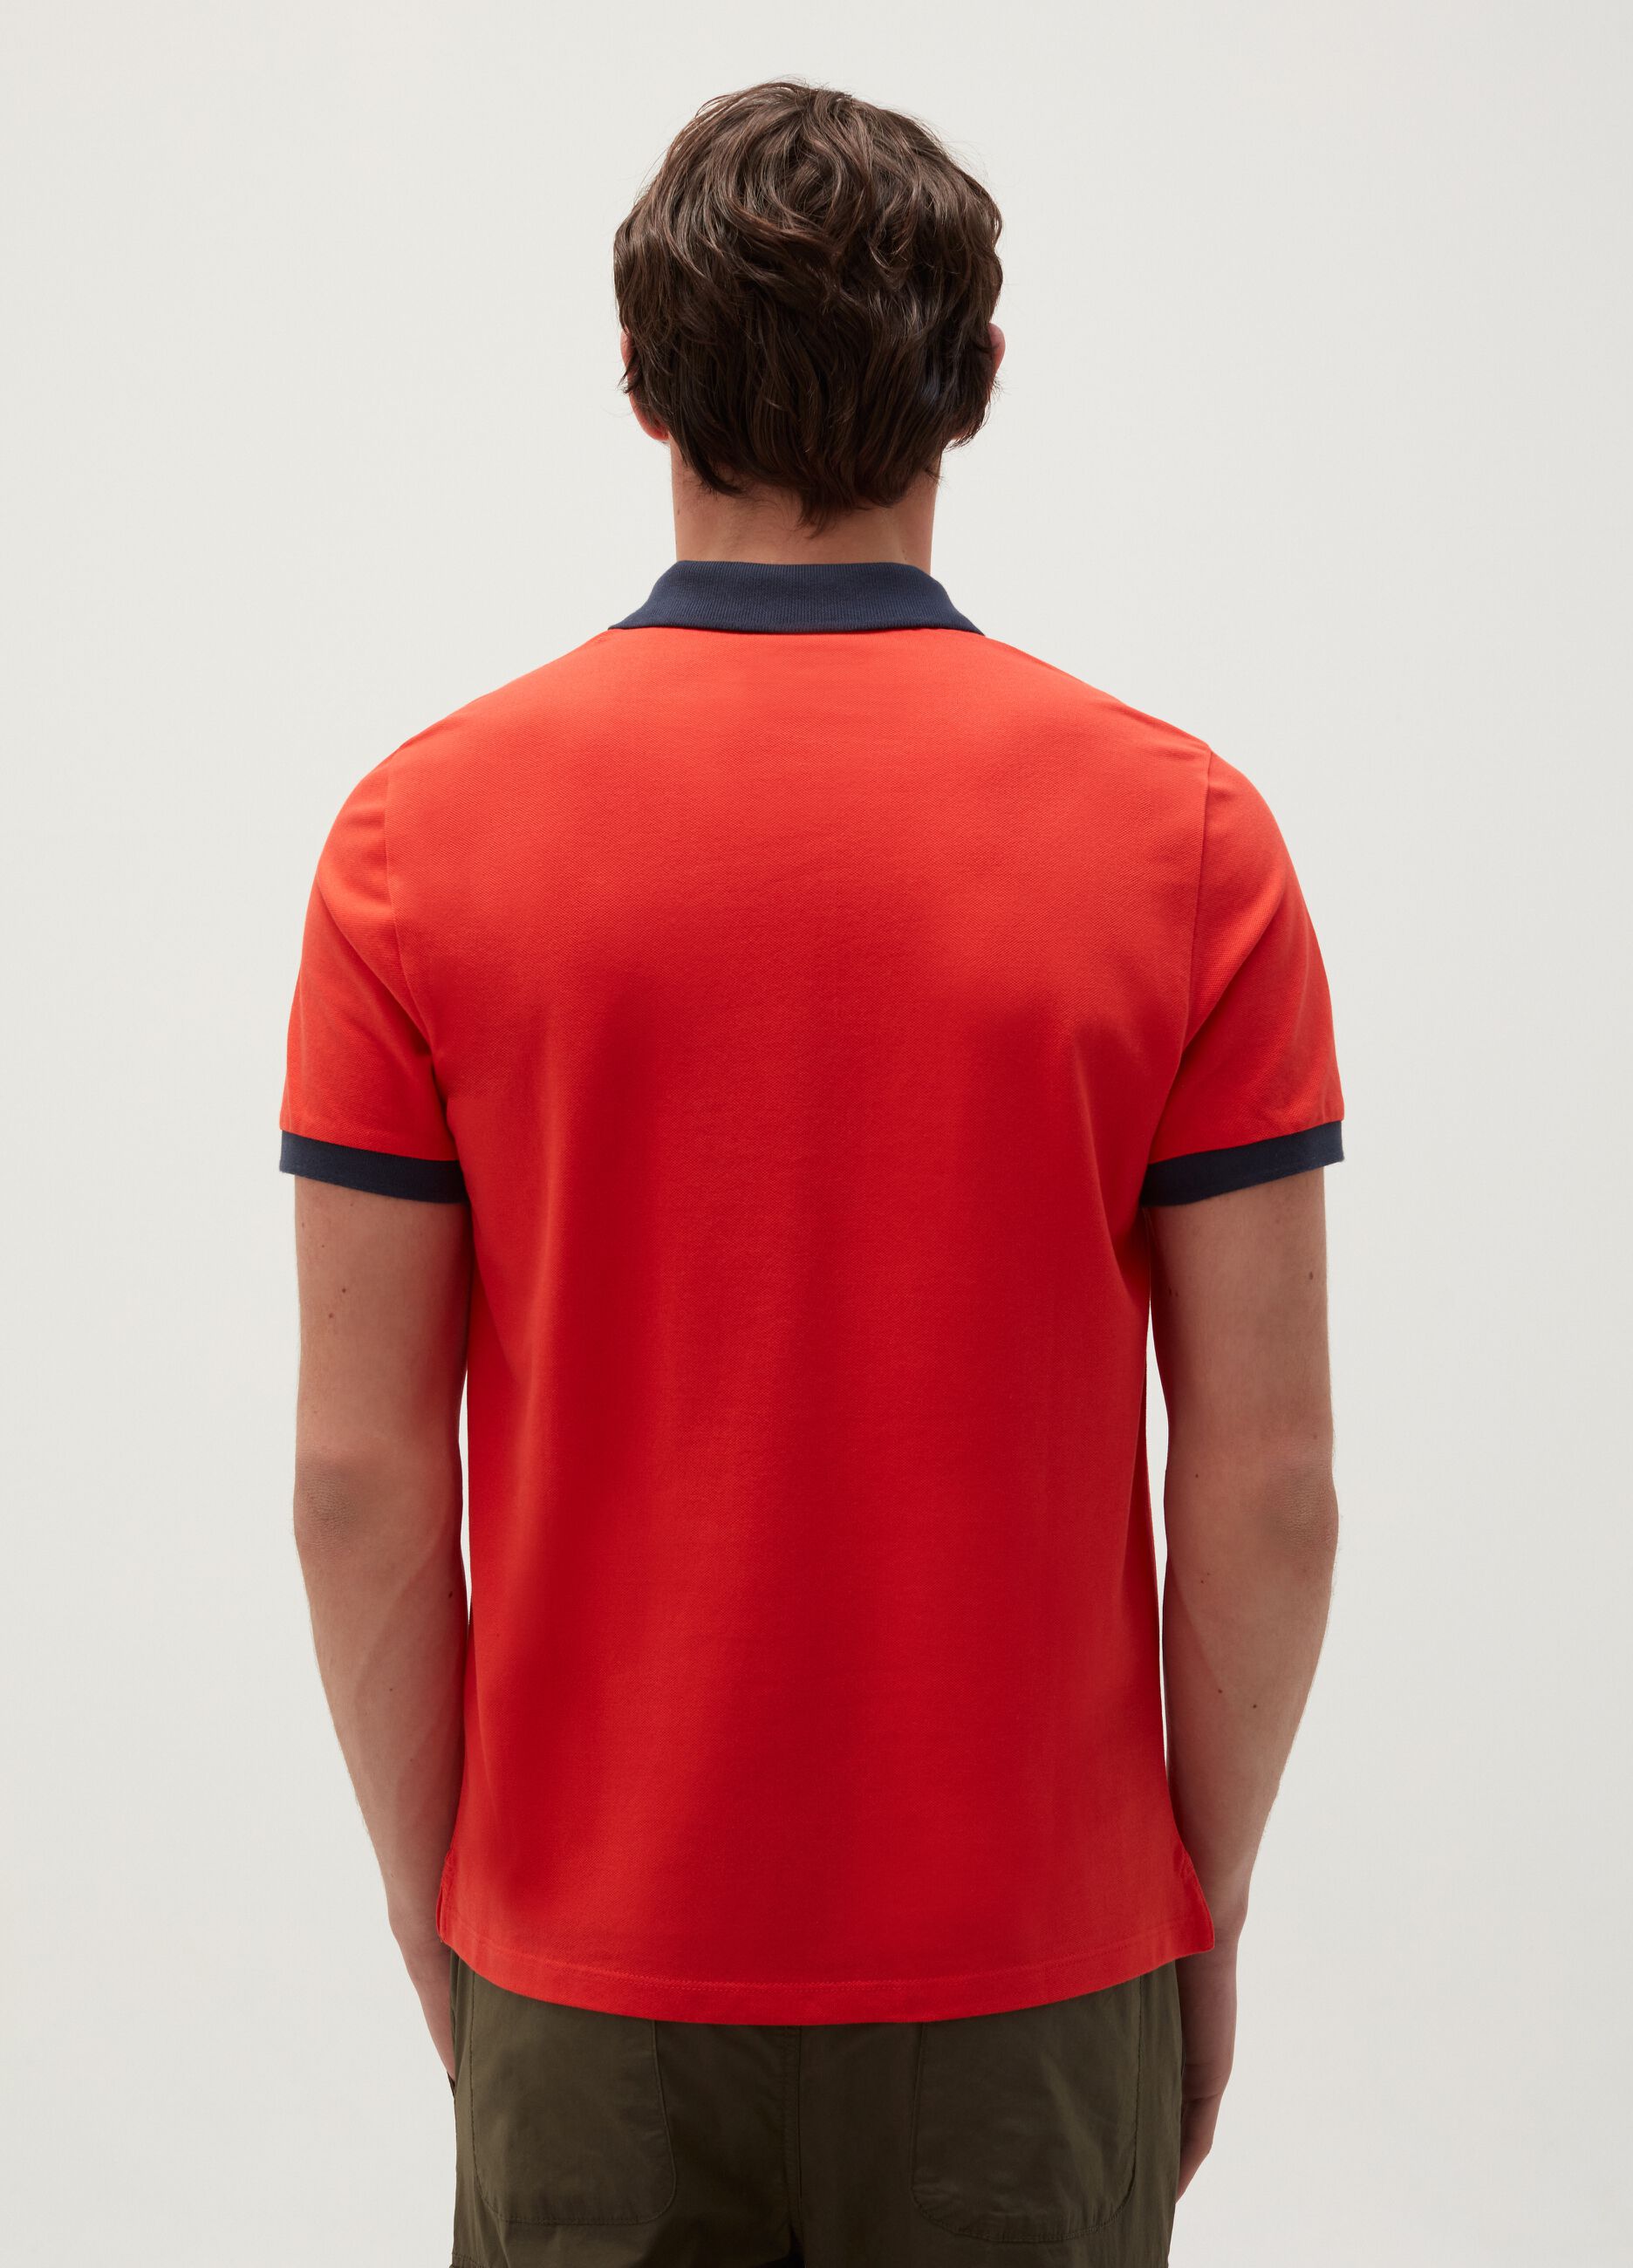 Cotton piquet polo shirt with contrasting details